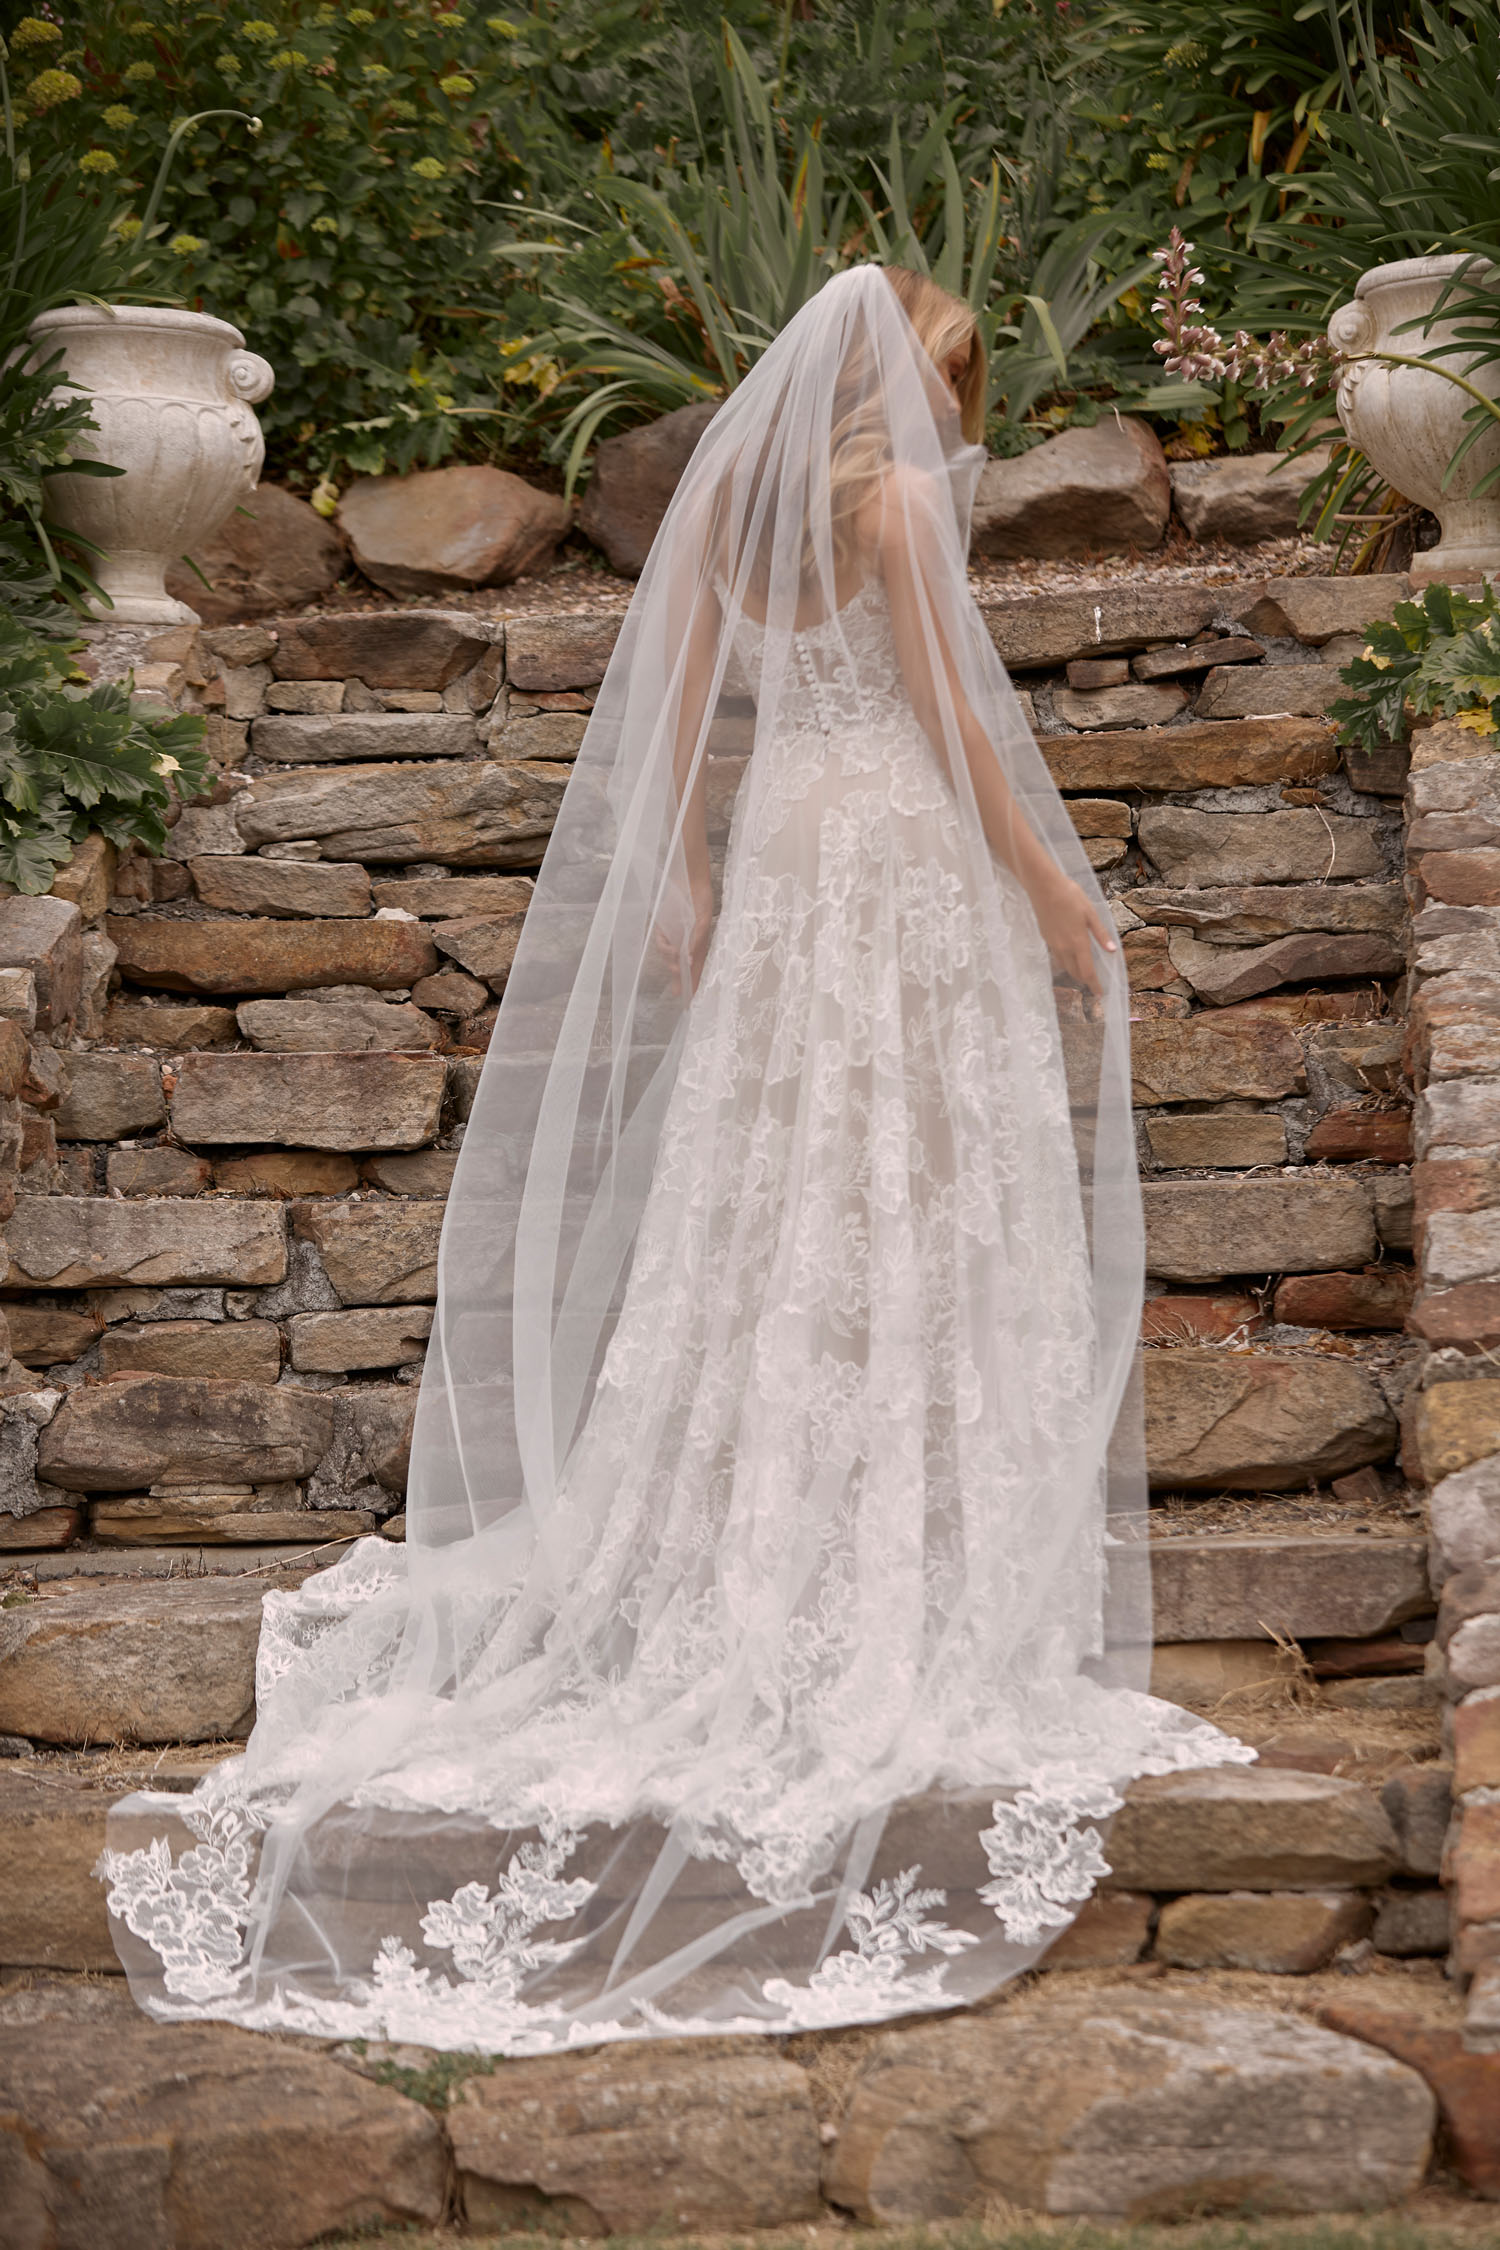 https://madilane.com/wp-content/uploads/2021/06/CLEO-ML20026-FULL-LENGTH-A-LINE-FLORAL-LACE-GOWN-SCOOP-NECKLINE-THIN-STRAPS-SCOOP-BACK-ZIPPER-AND-BUTTON-CLOSURE-MATCHING-VEIL-WEDDING-DRESS-MADI-LANE-BRIDAL-9.jpg